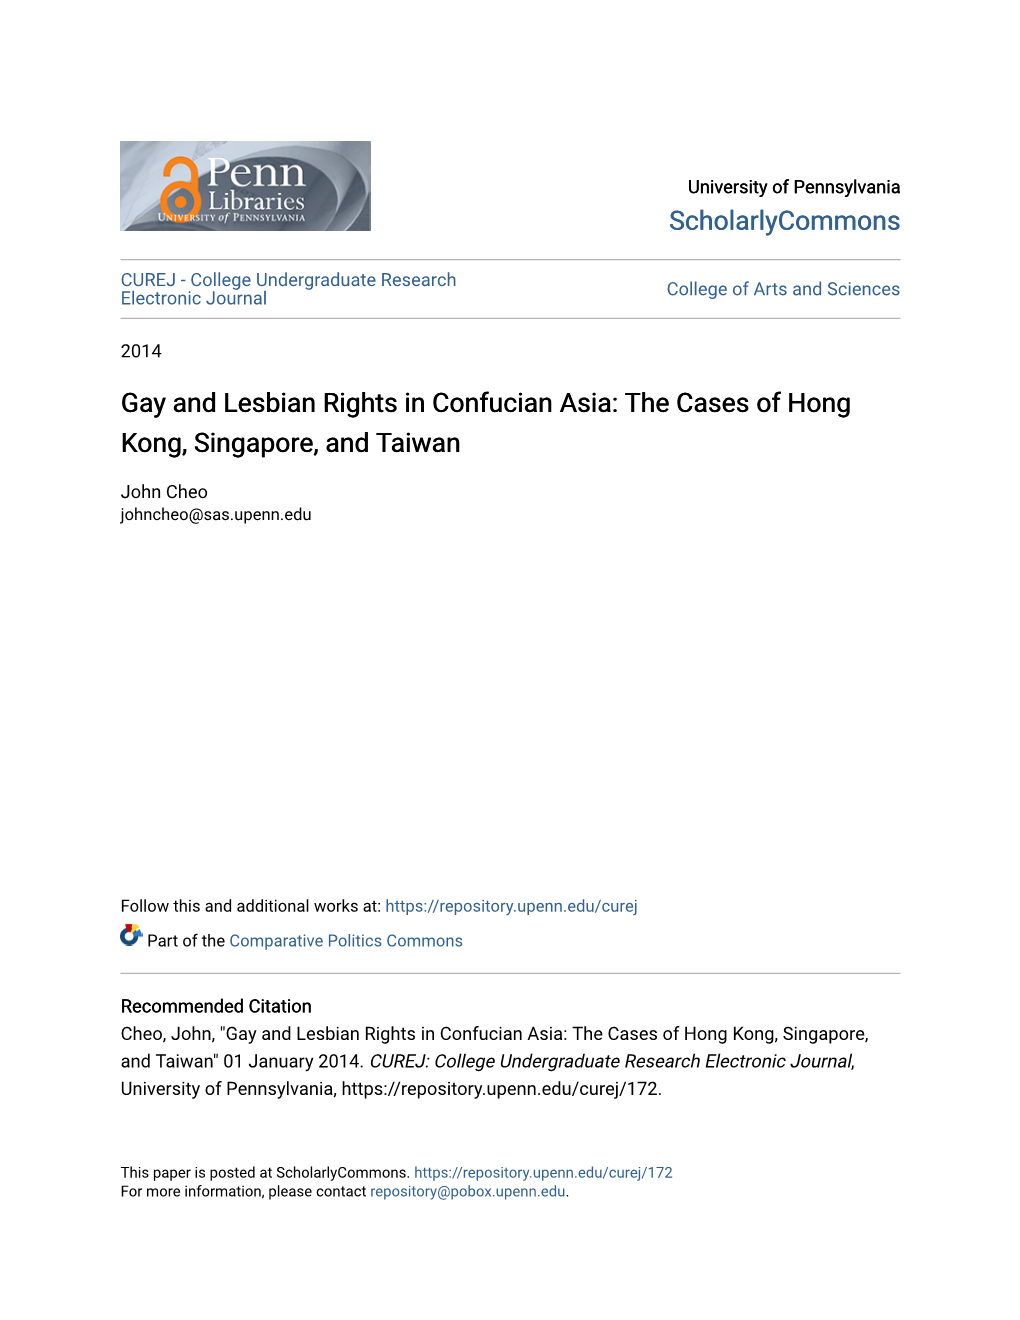 Gay and Lesbian Rights in Confucian Asia: the Cases of Hong Kong, Singapore, and Taiwan